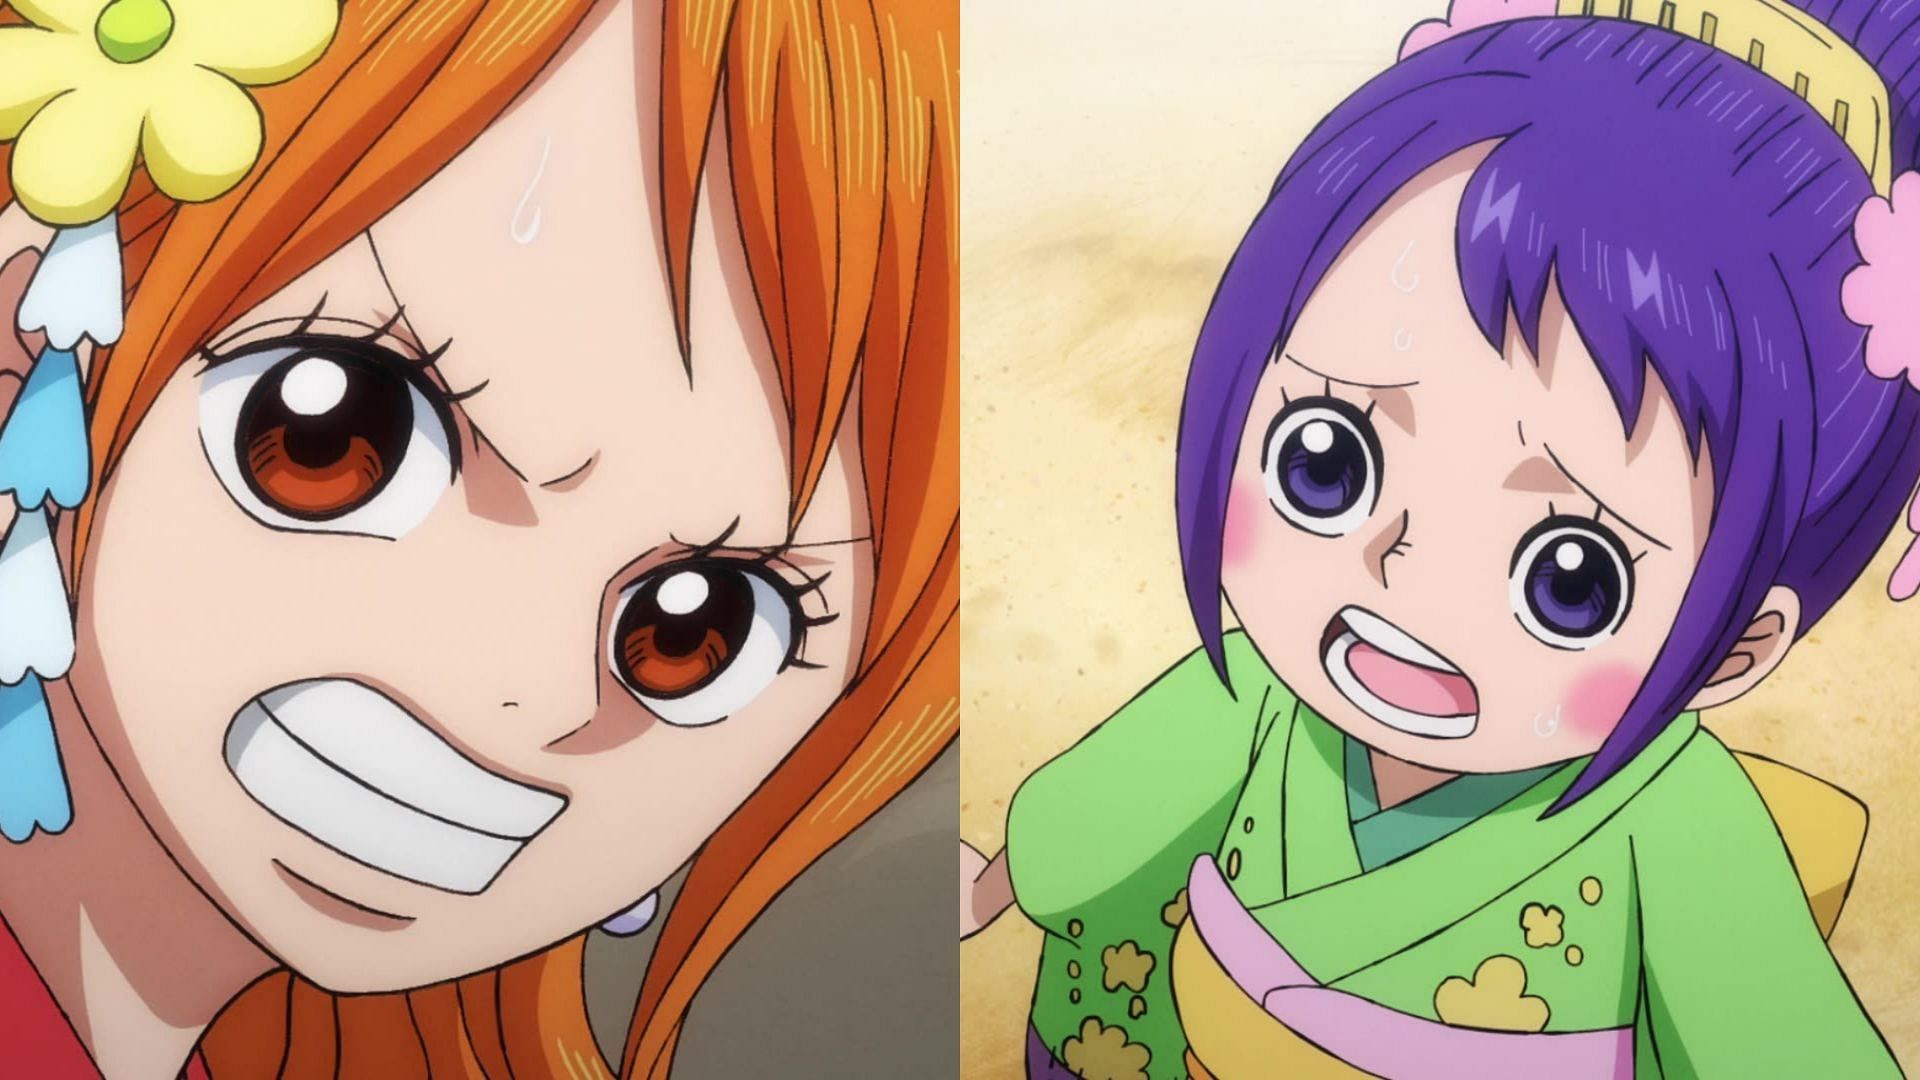 Pin by Tishaa on One Piece Episode 1  One piece, One piece images, One  piece episodes